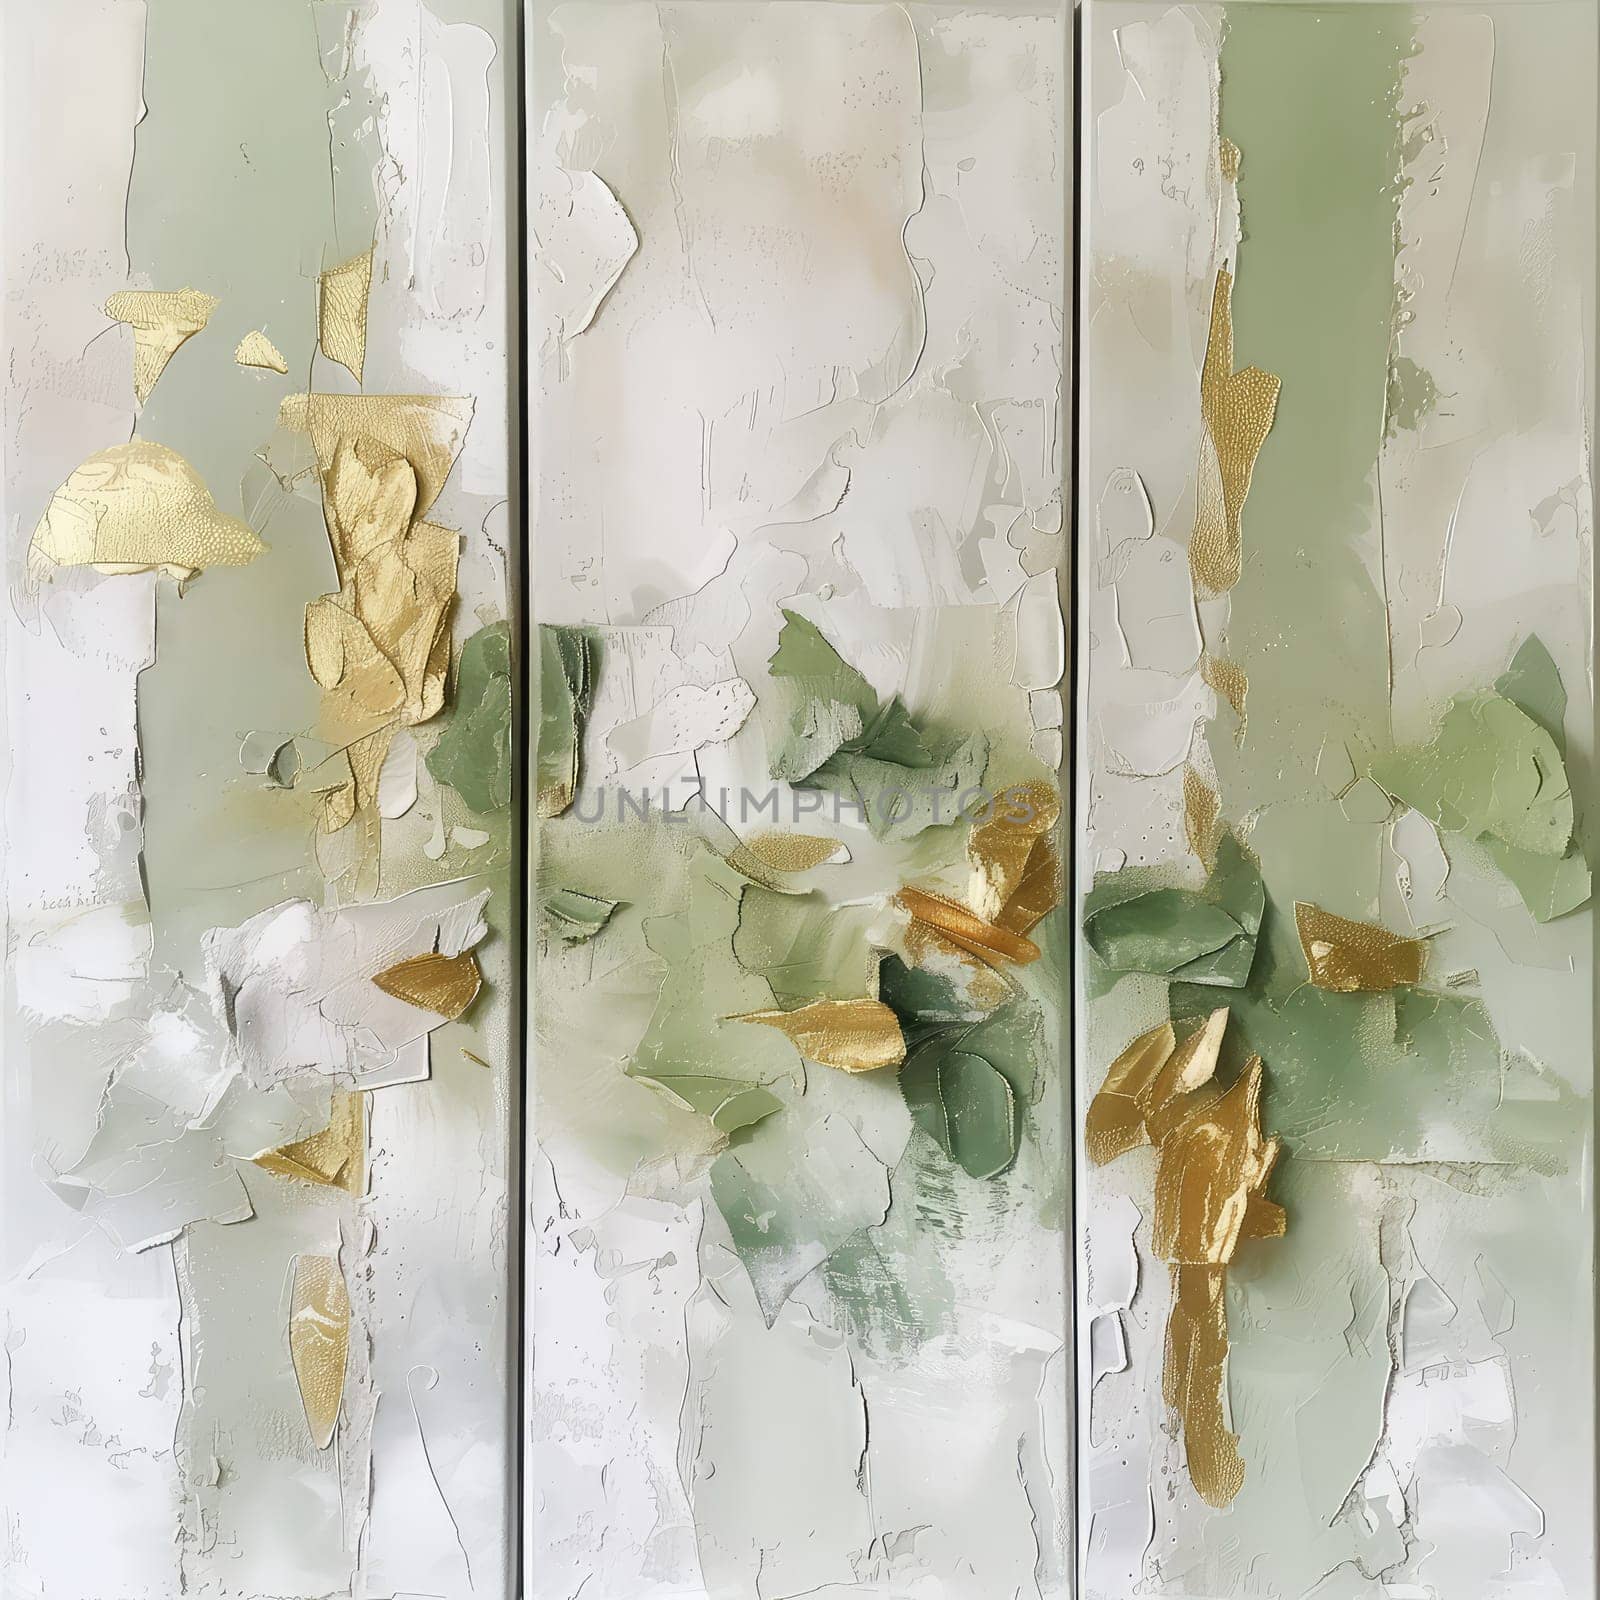 Abstract Triptych Canvas in Pale Green and Gold, Ideal for Modern Home Decor by Dvorak